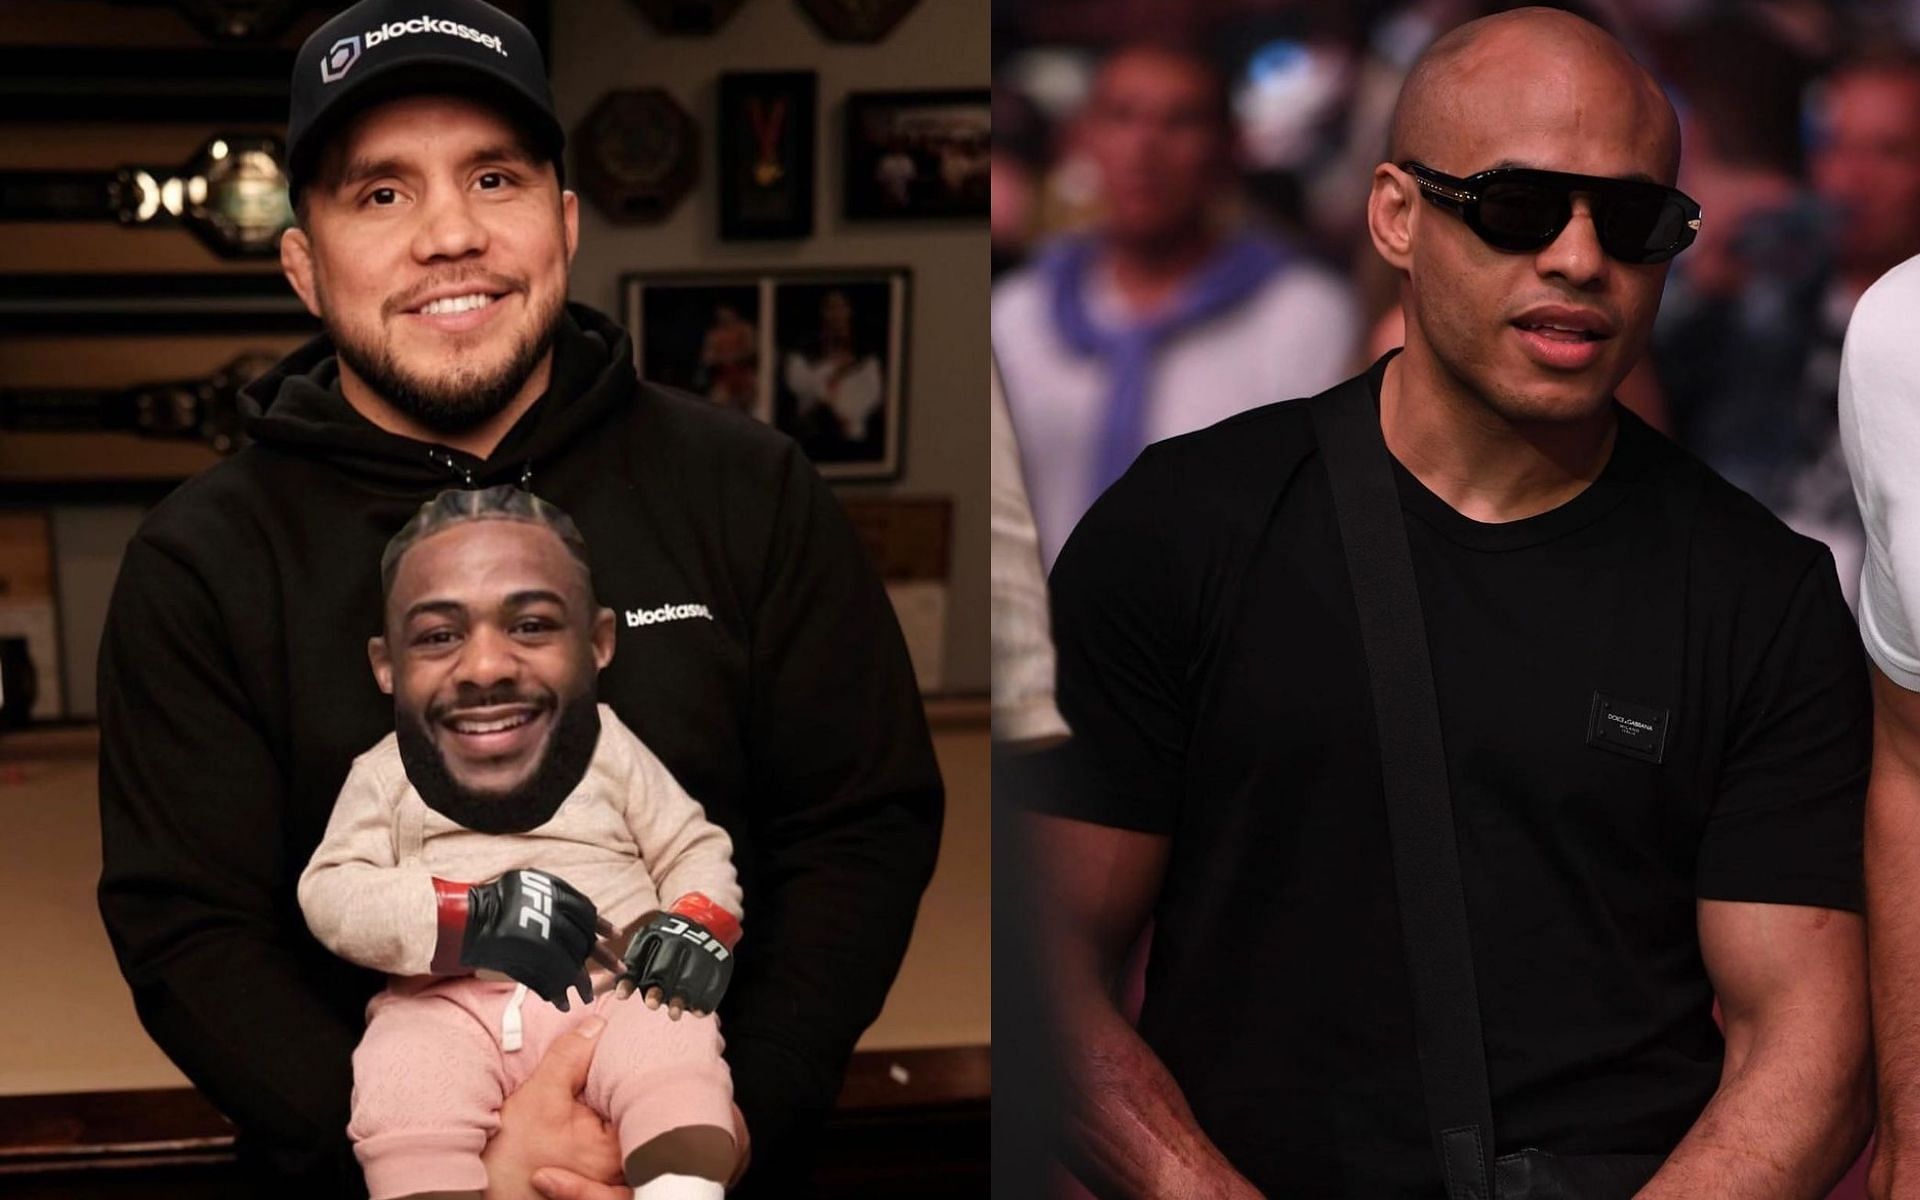 Henry Cejudo holding a baby edited to include Aljamain Sterling&#039;s face (L) and Ali Abdelaziz (R) [ Credit: Instagram @Henry_Cejudo @aliabdelaziz ]